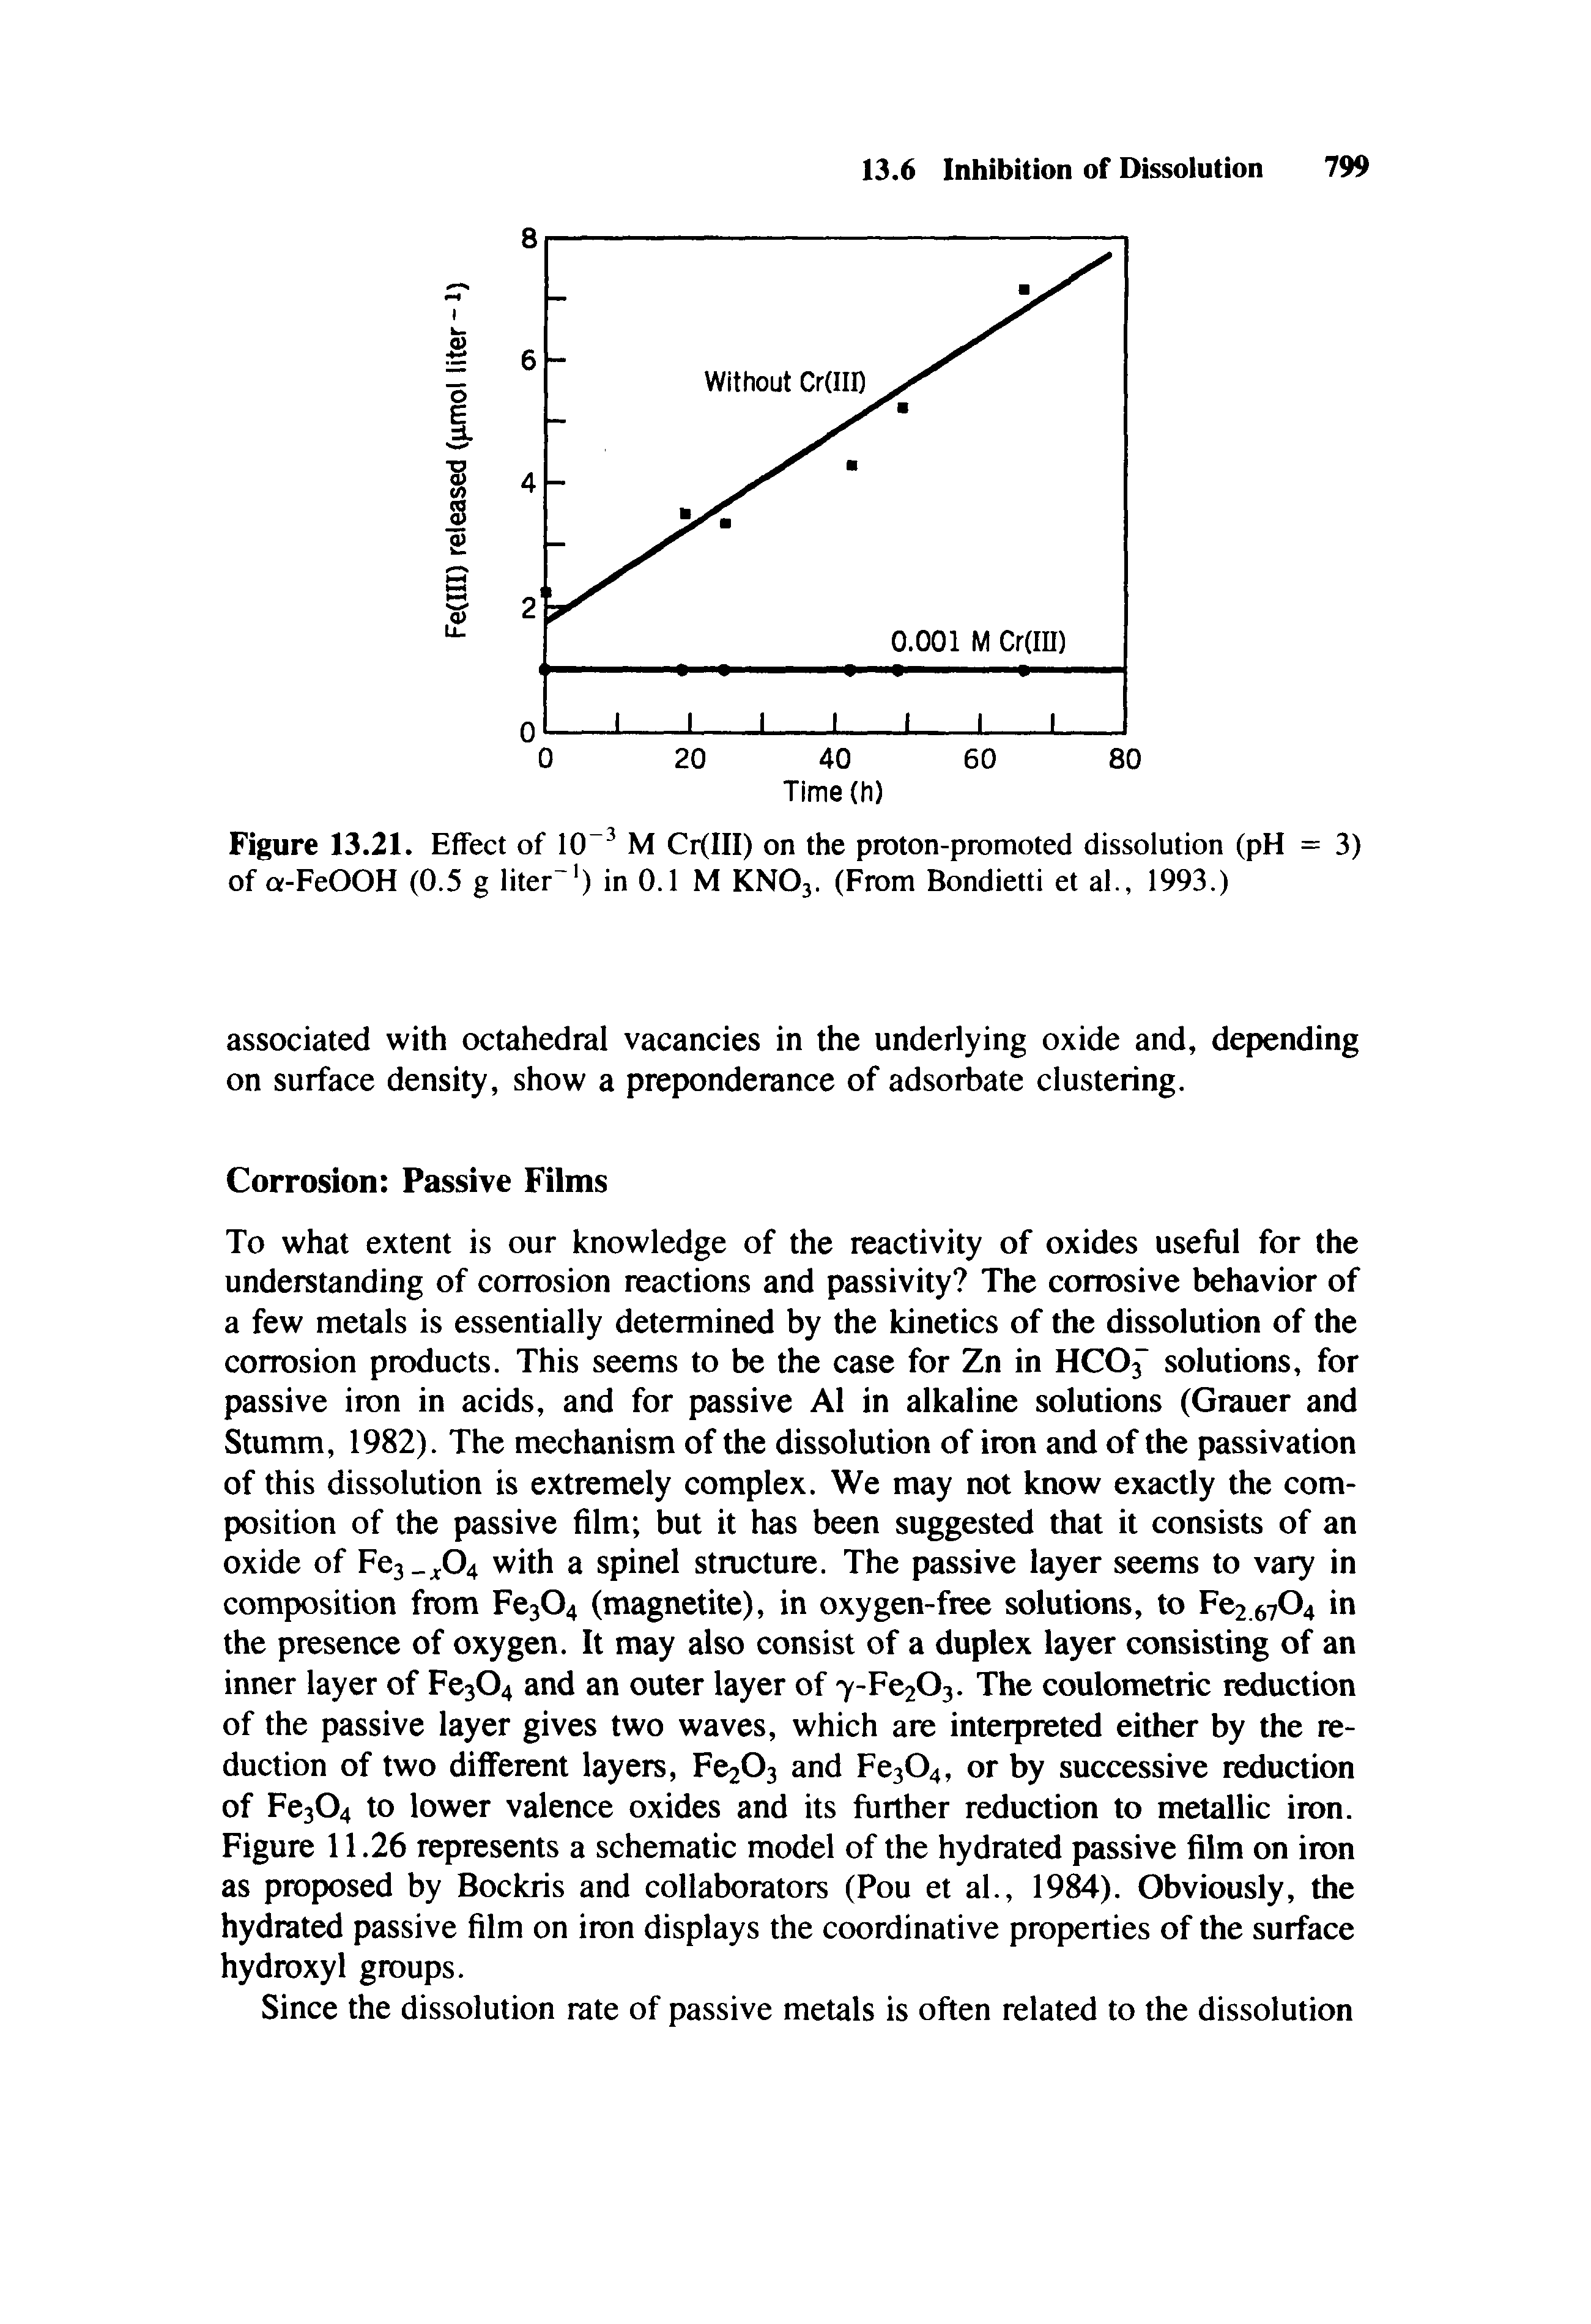 Figure 13.21. Effect of 10 M Cr(III) on the proton-promoted dissolution (pH = 3) of a-FeOOH (0.5 g liter ) in 0.1 M KNO3. (From Bondietti et al., 1993.)...